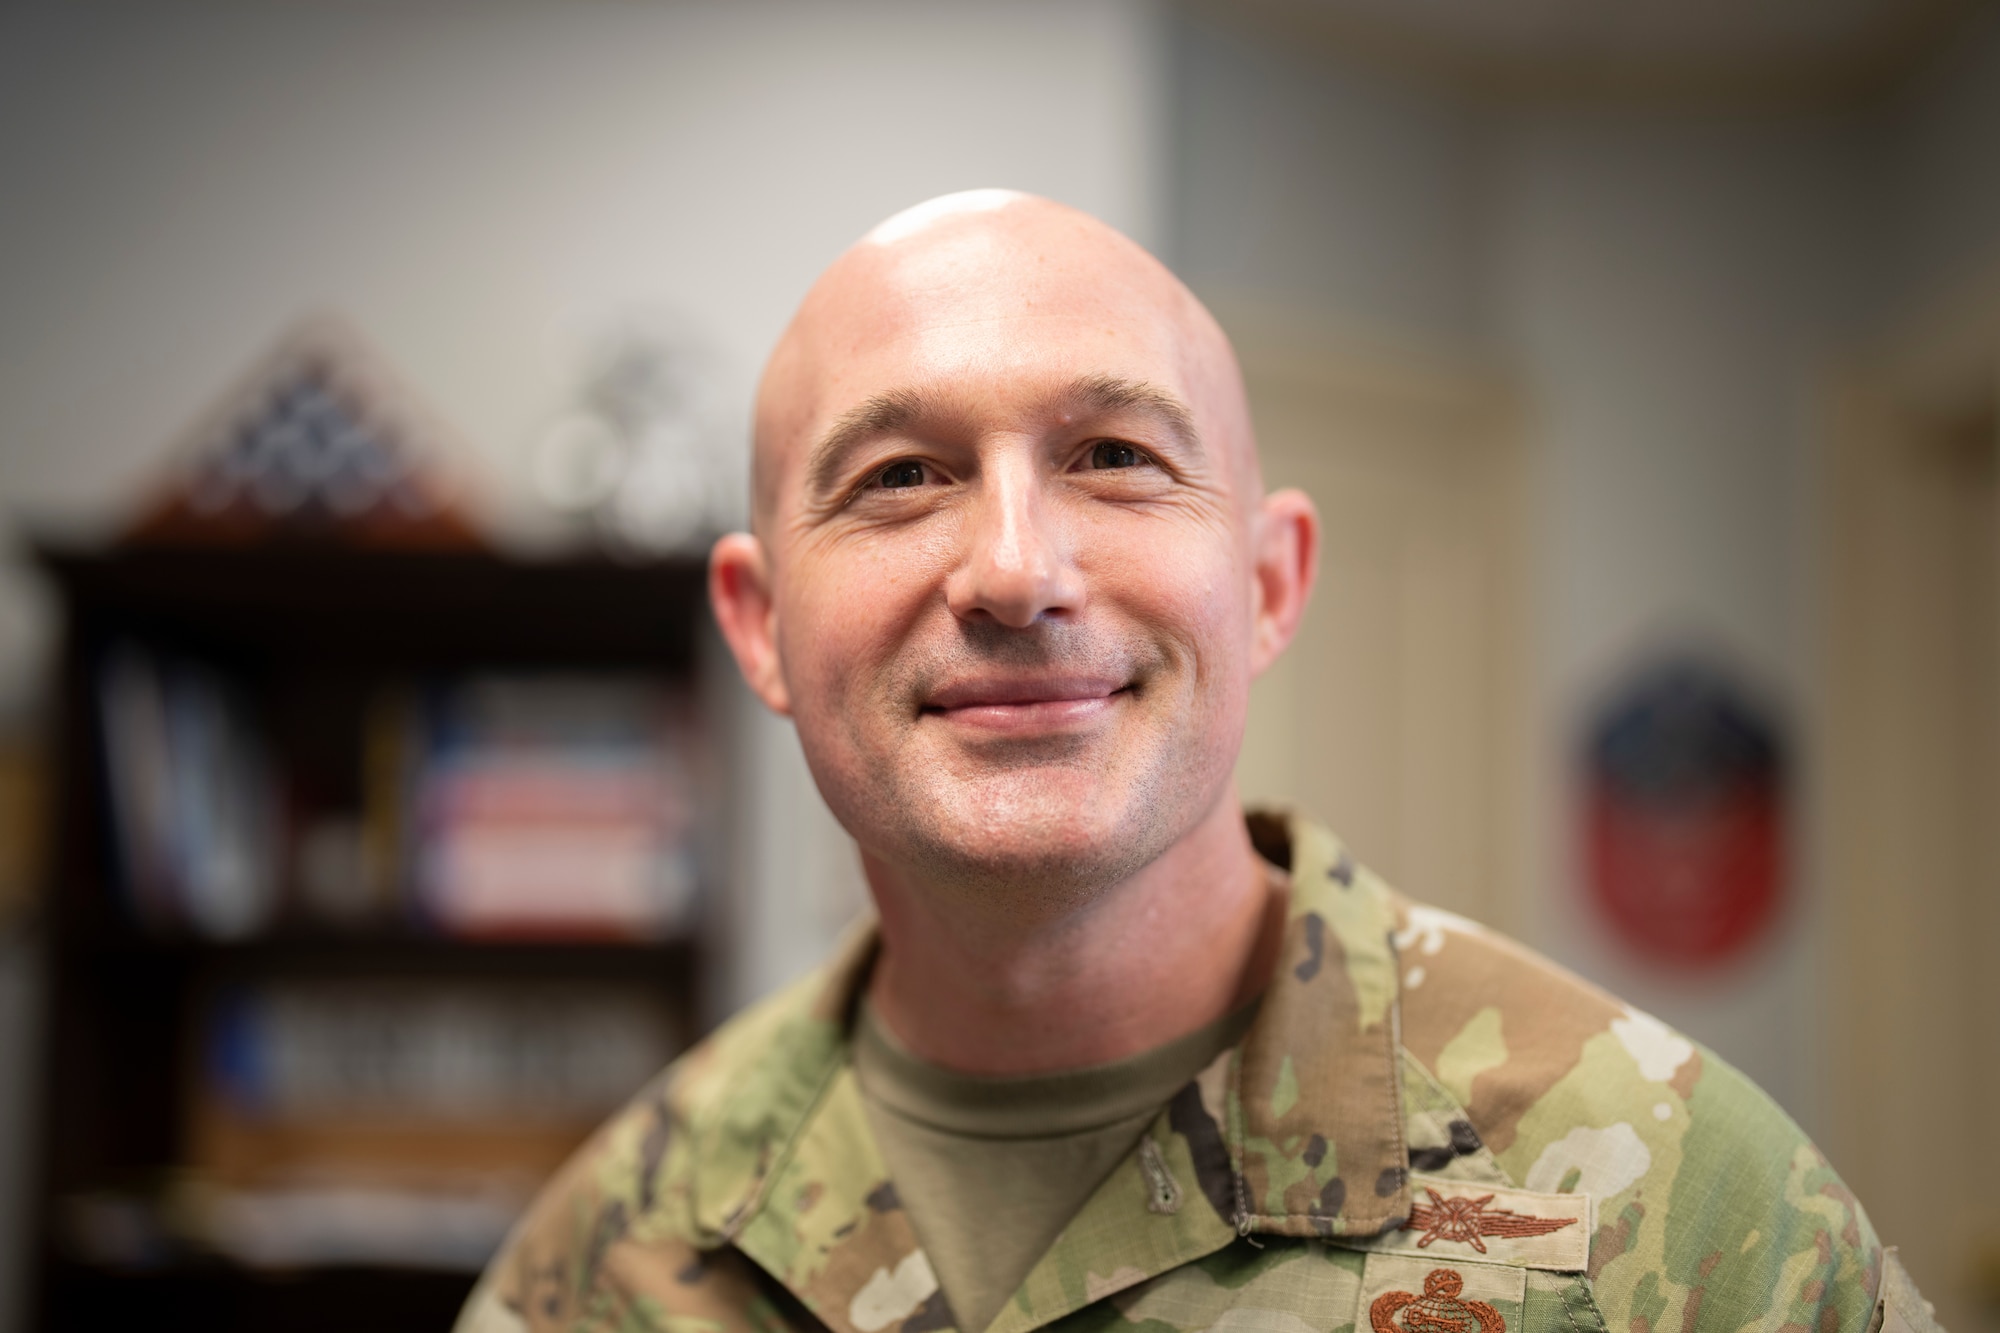 Chief Master Sgt. Stefan Blazier arrived at Maxwell Air Force Base, Alabama, in mid-June to take on the duty of command chief for Air University. In this position, he serves as the advisor to the AU commander on all matters affecting enlisted members on campus and at more than 1,300 locations worldwide. (U.S. Air Force photo by Airman 1st Class Cody Gandy)